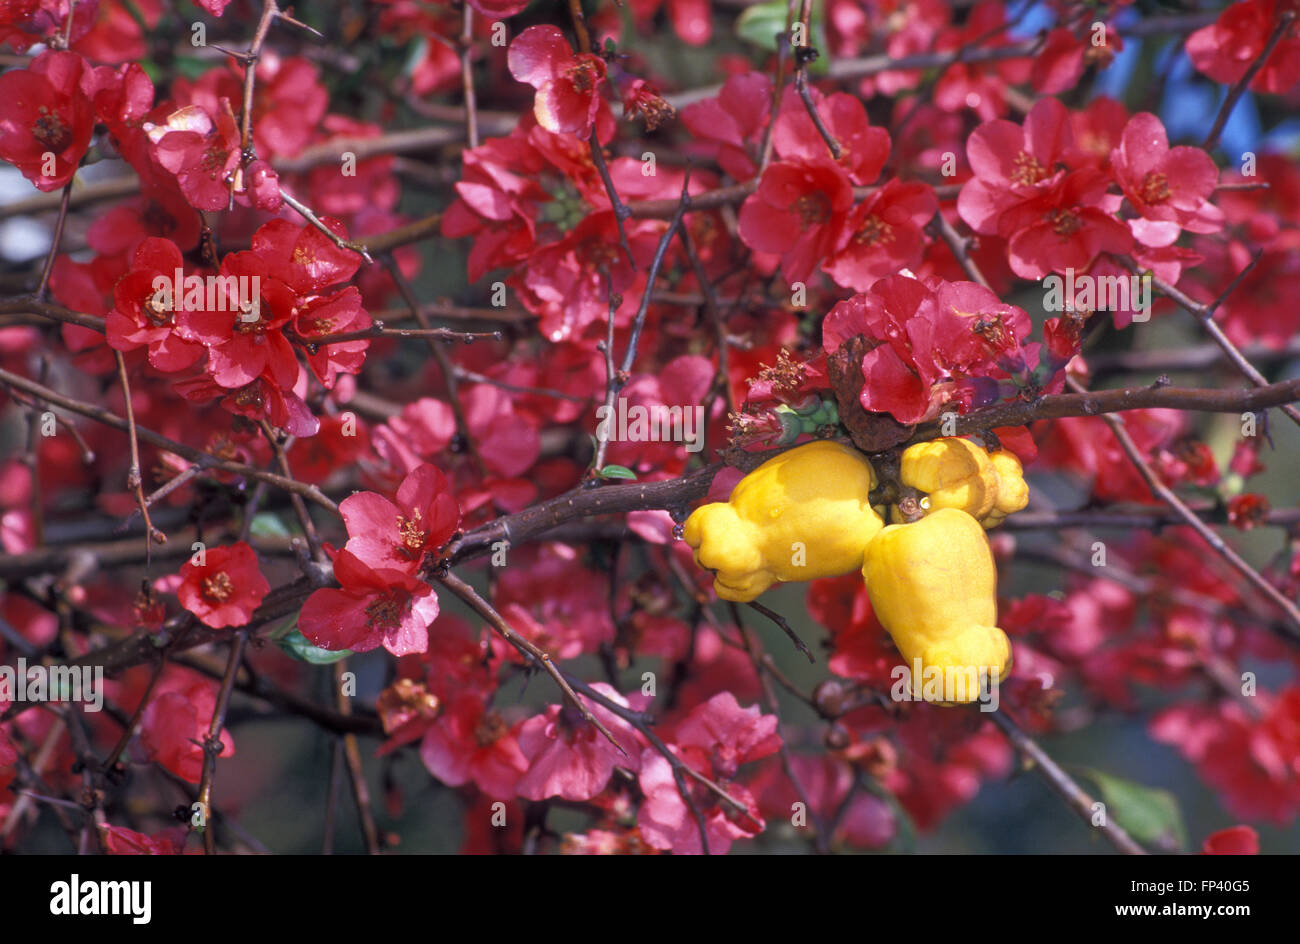 CHAENOMELES IN FLOWER COMMONLY KNOWN AS FLOWERING QUINCE OR JAPANESE FLOWERING QUINCE. Stock Photo